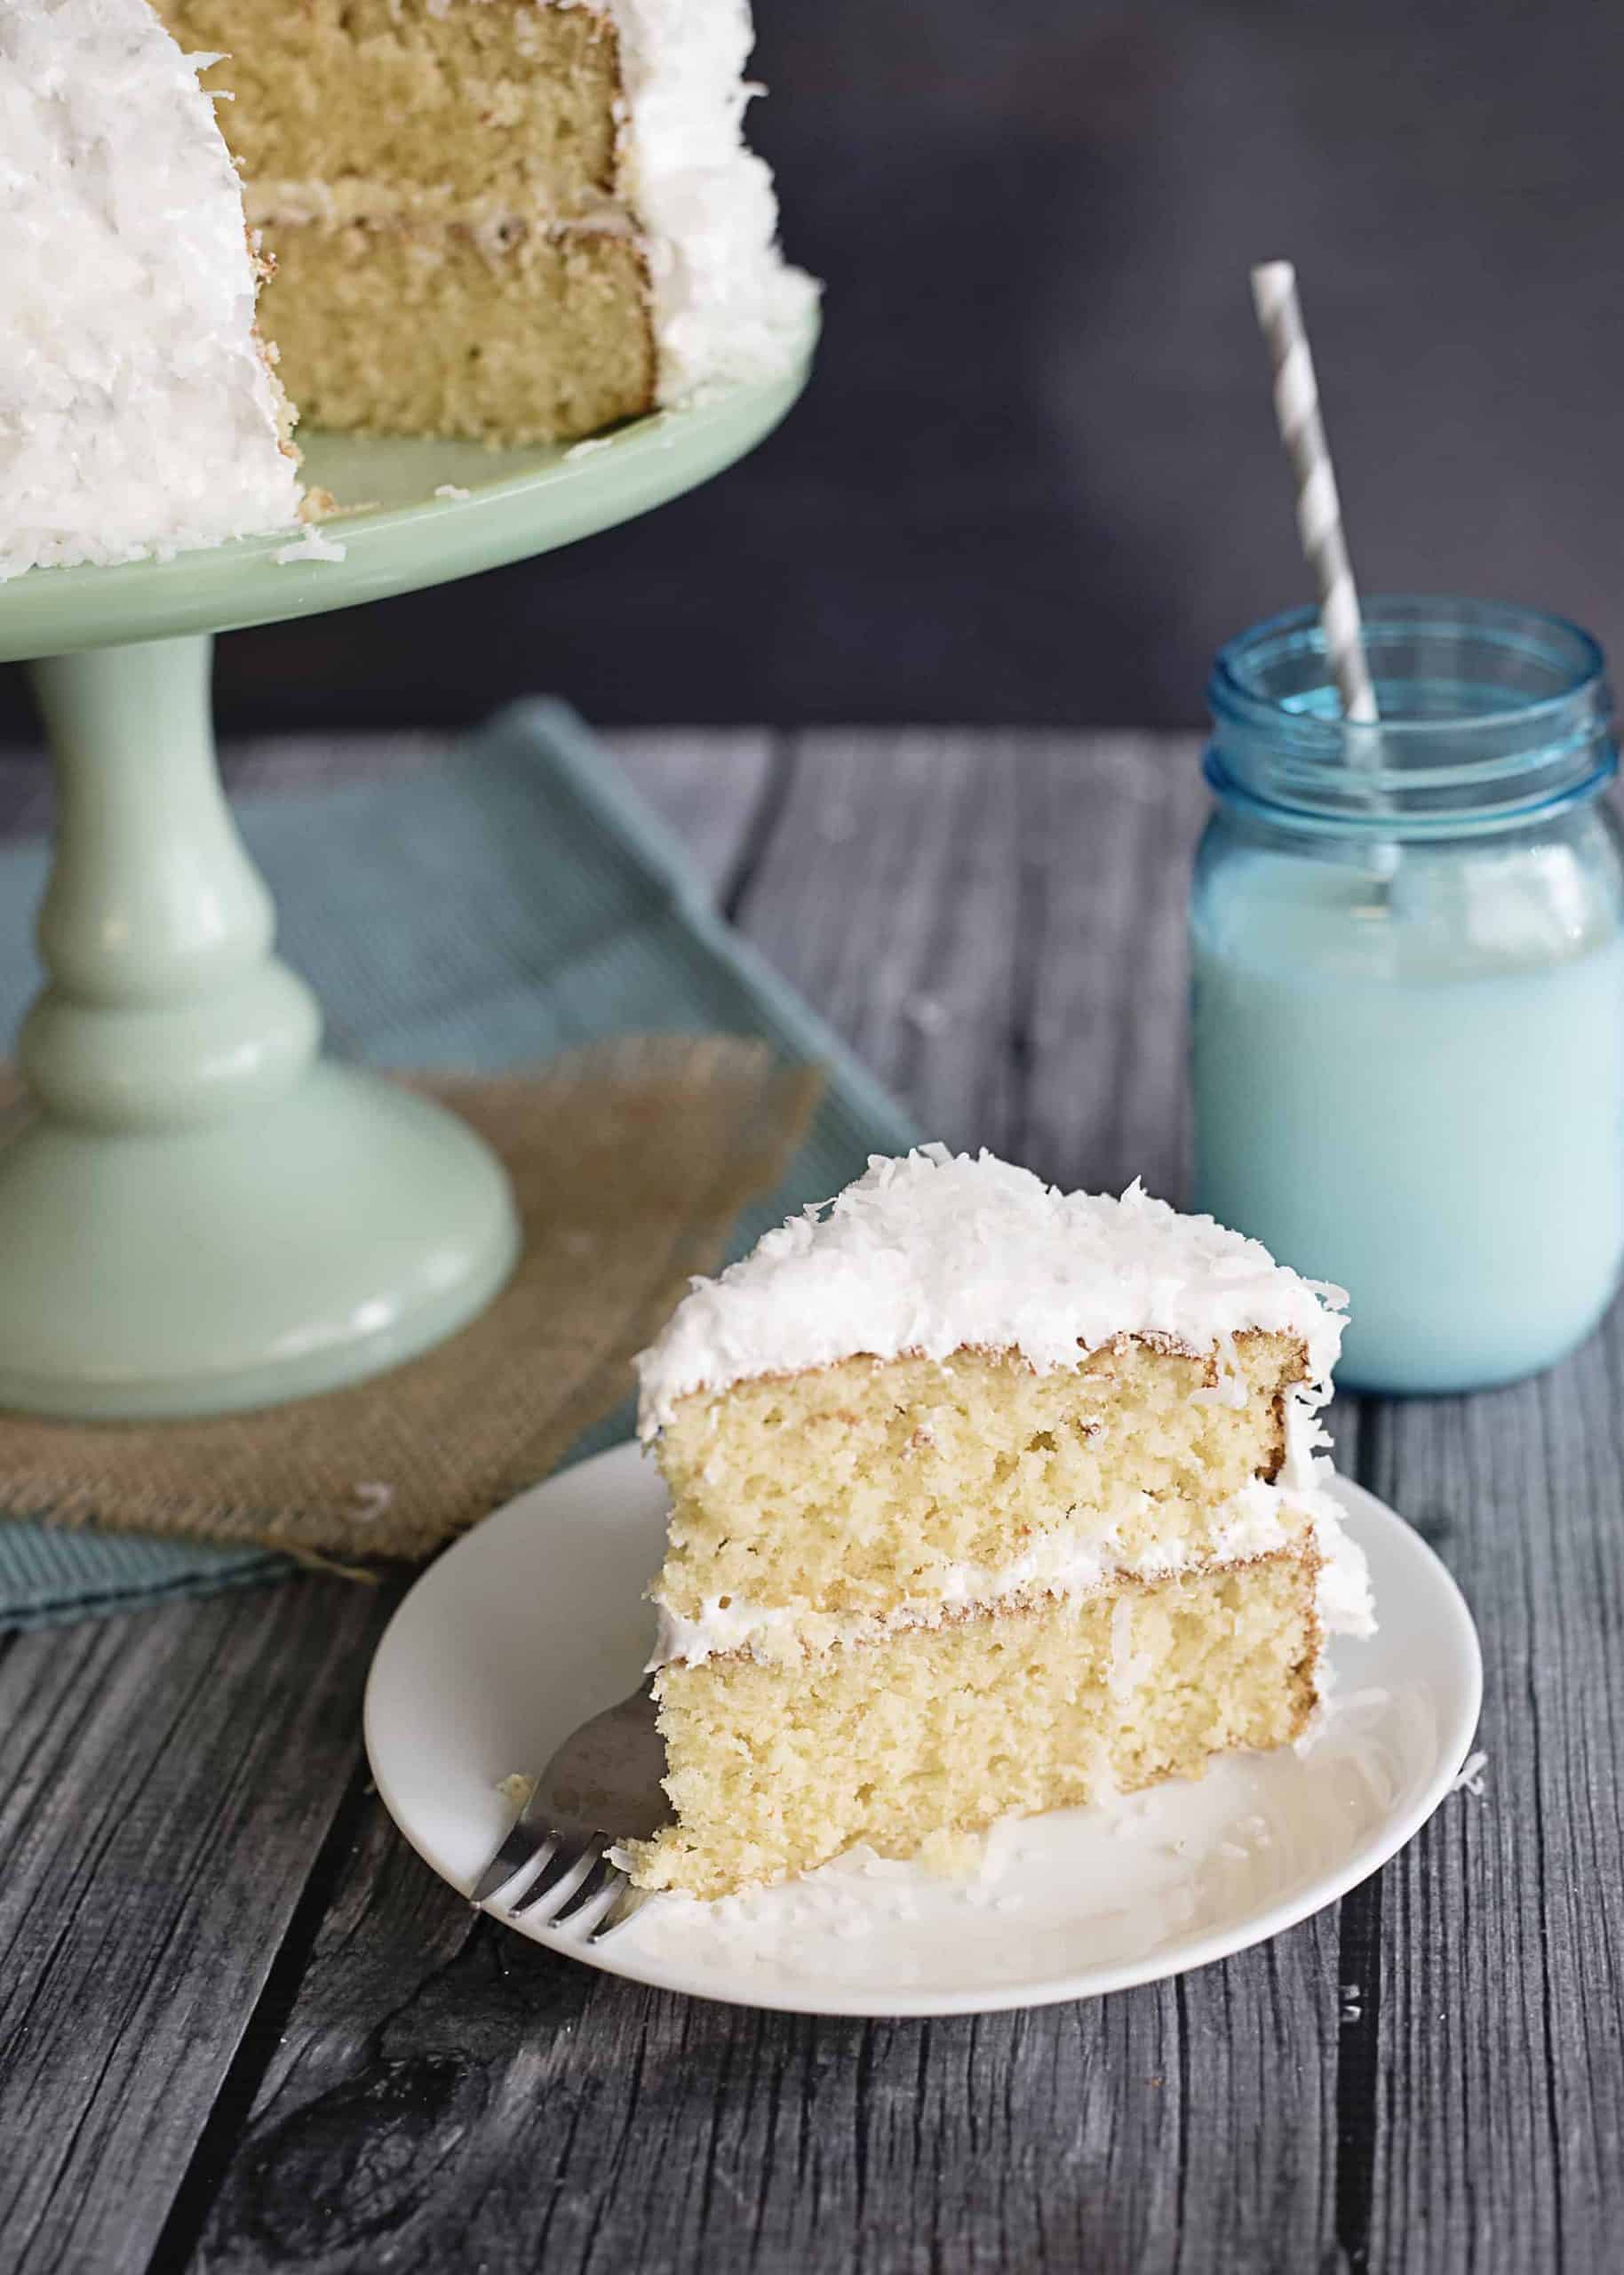 Grandmama’s Coconut Cake With No-Fail Seven Minute Frosting